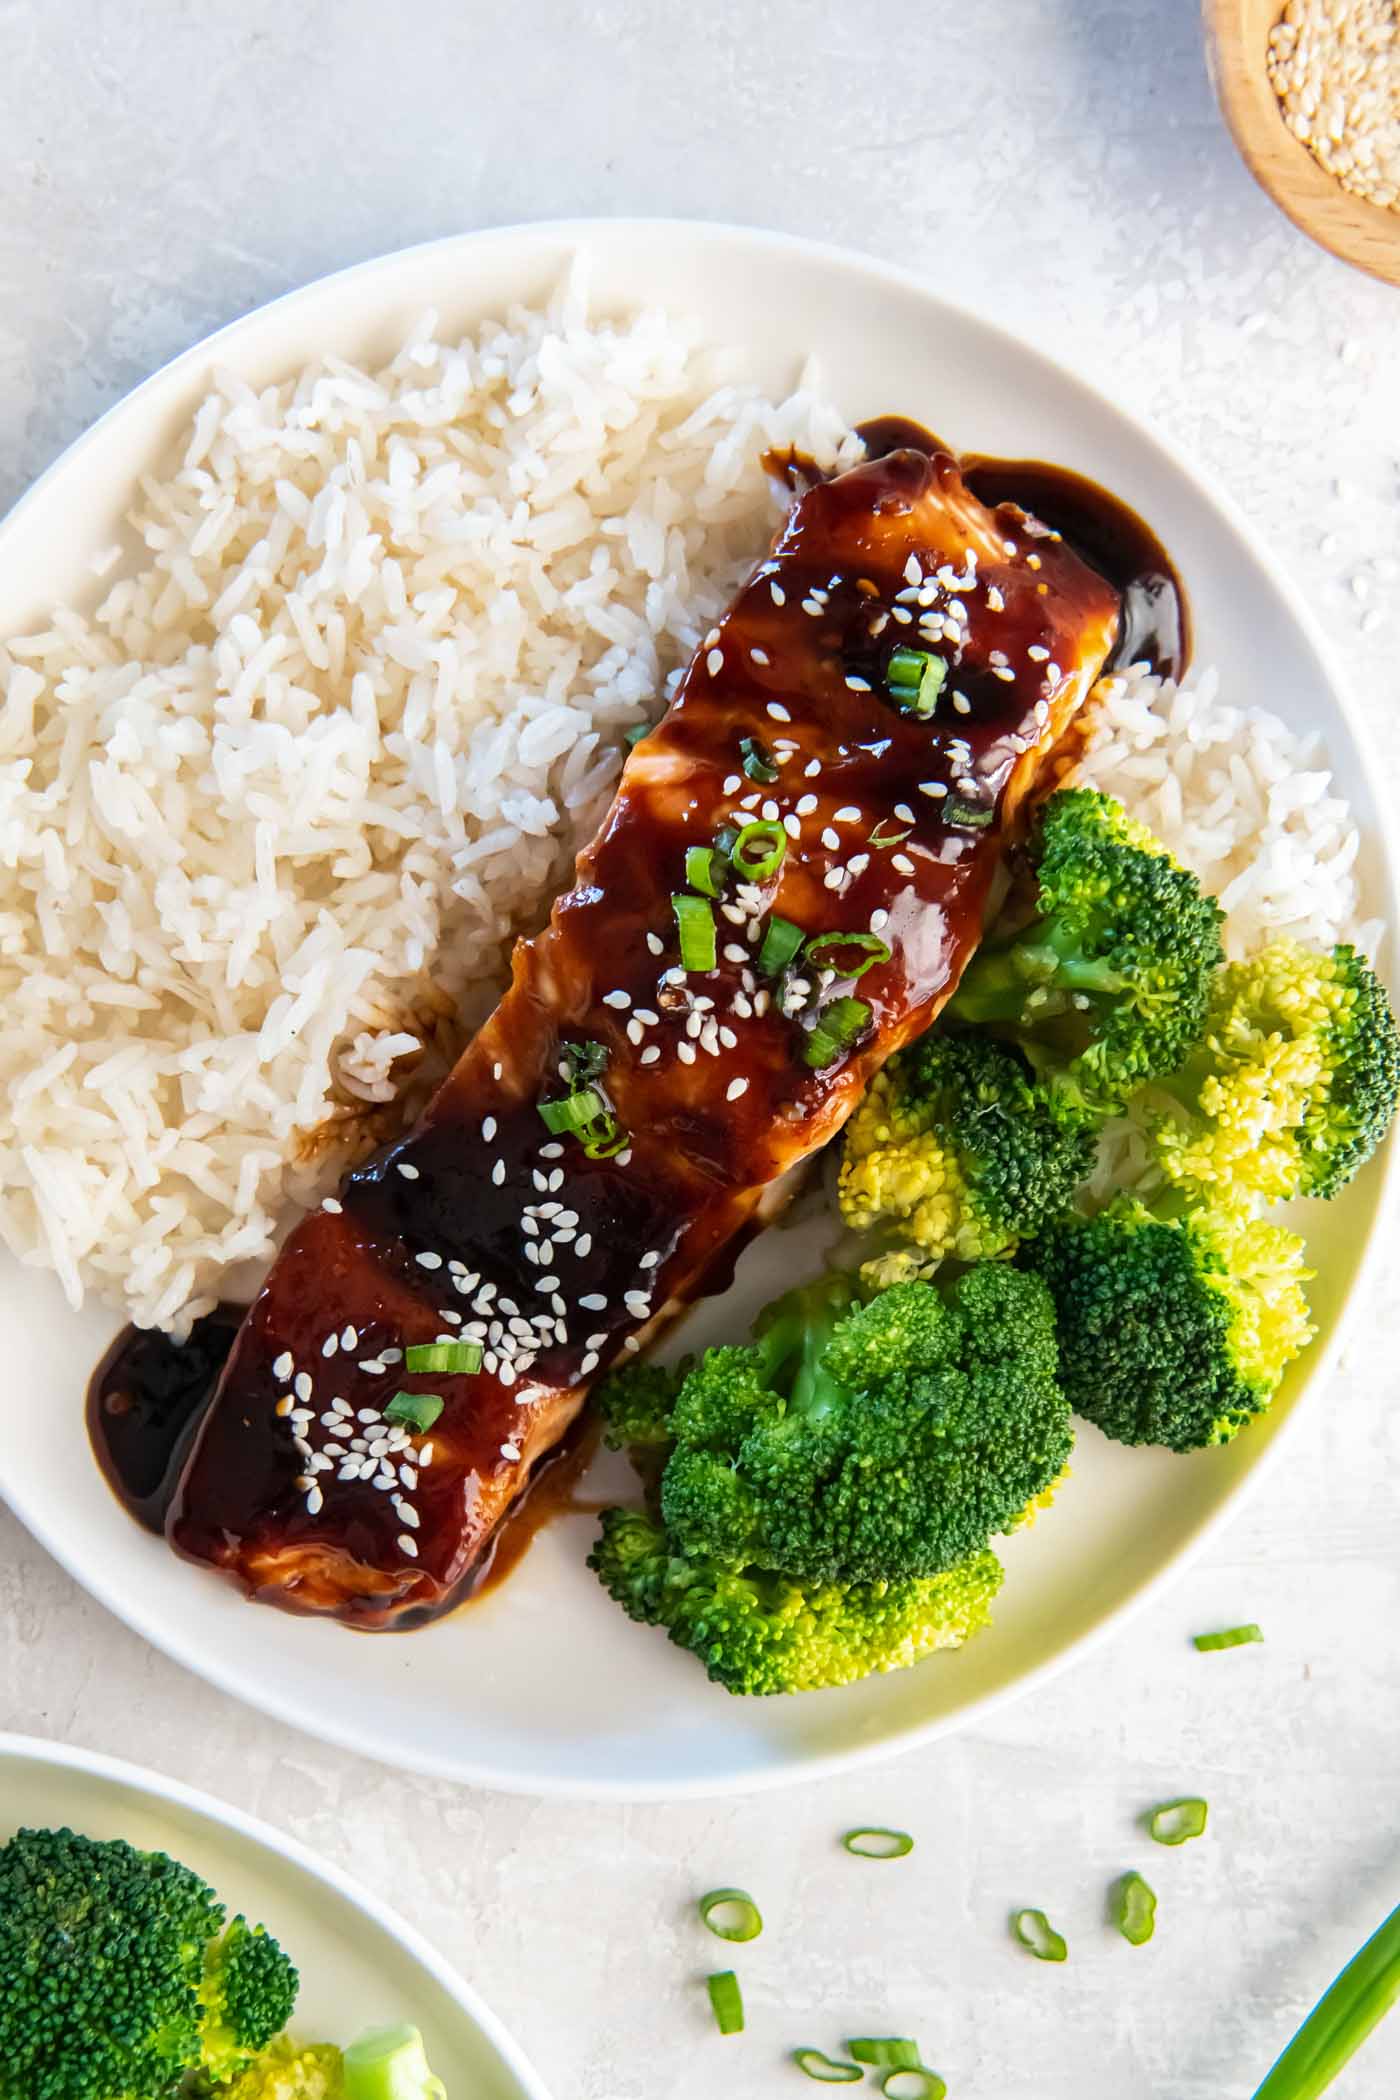 Fillet of teriyaki salmon served with white rice and steamed broccoli.